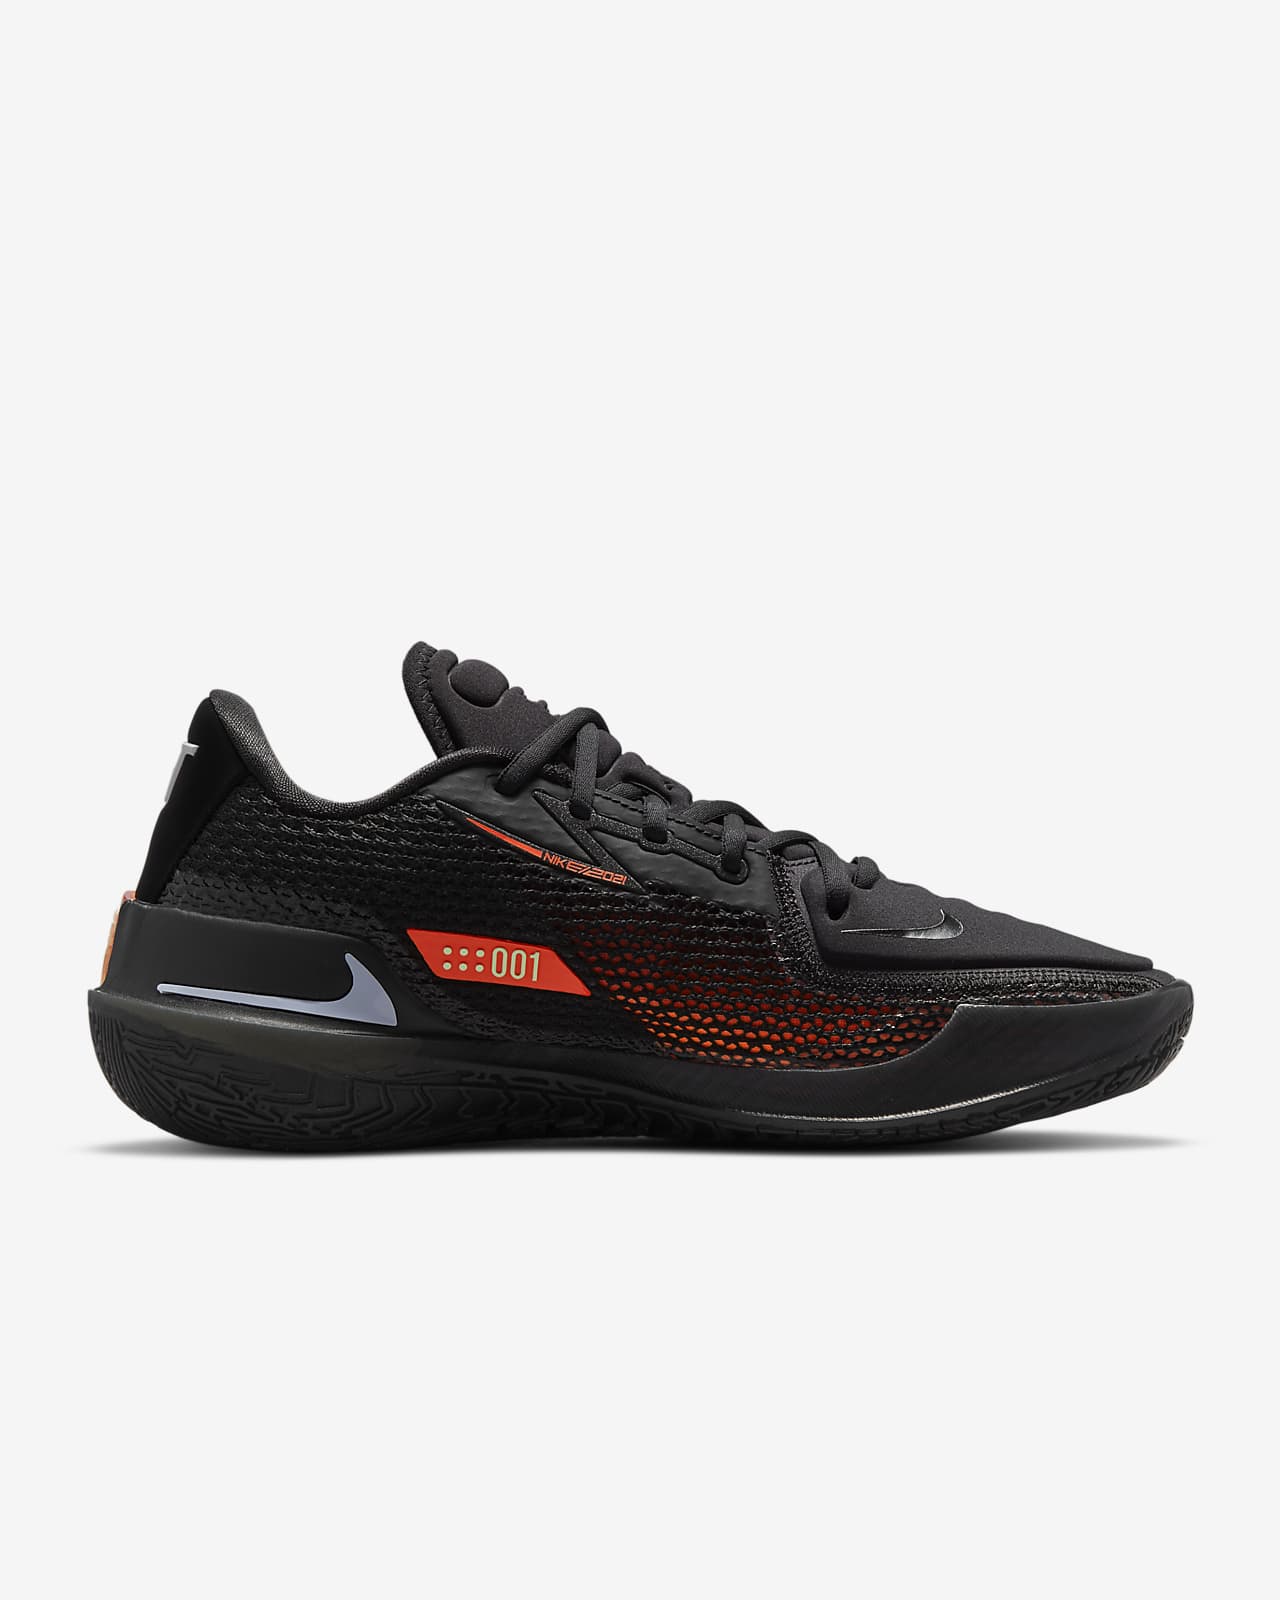 nike zoom low cut basketball shoes